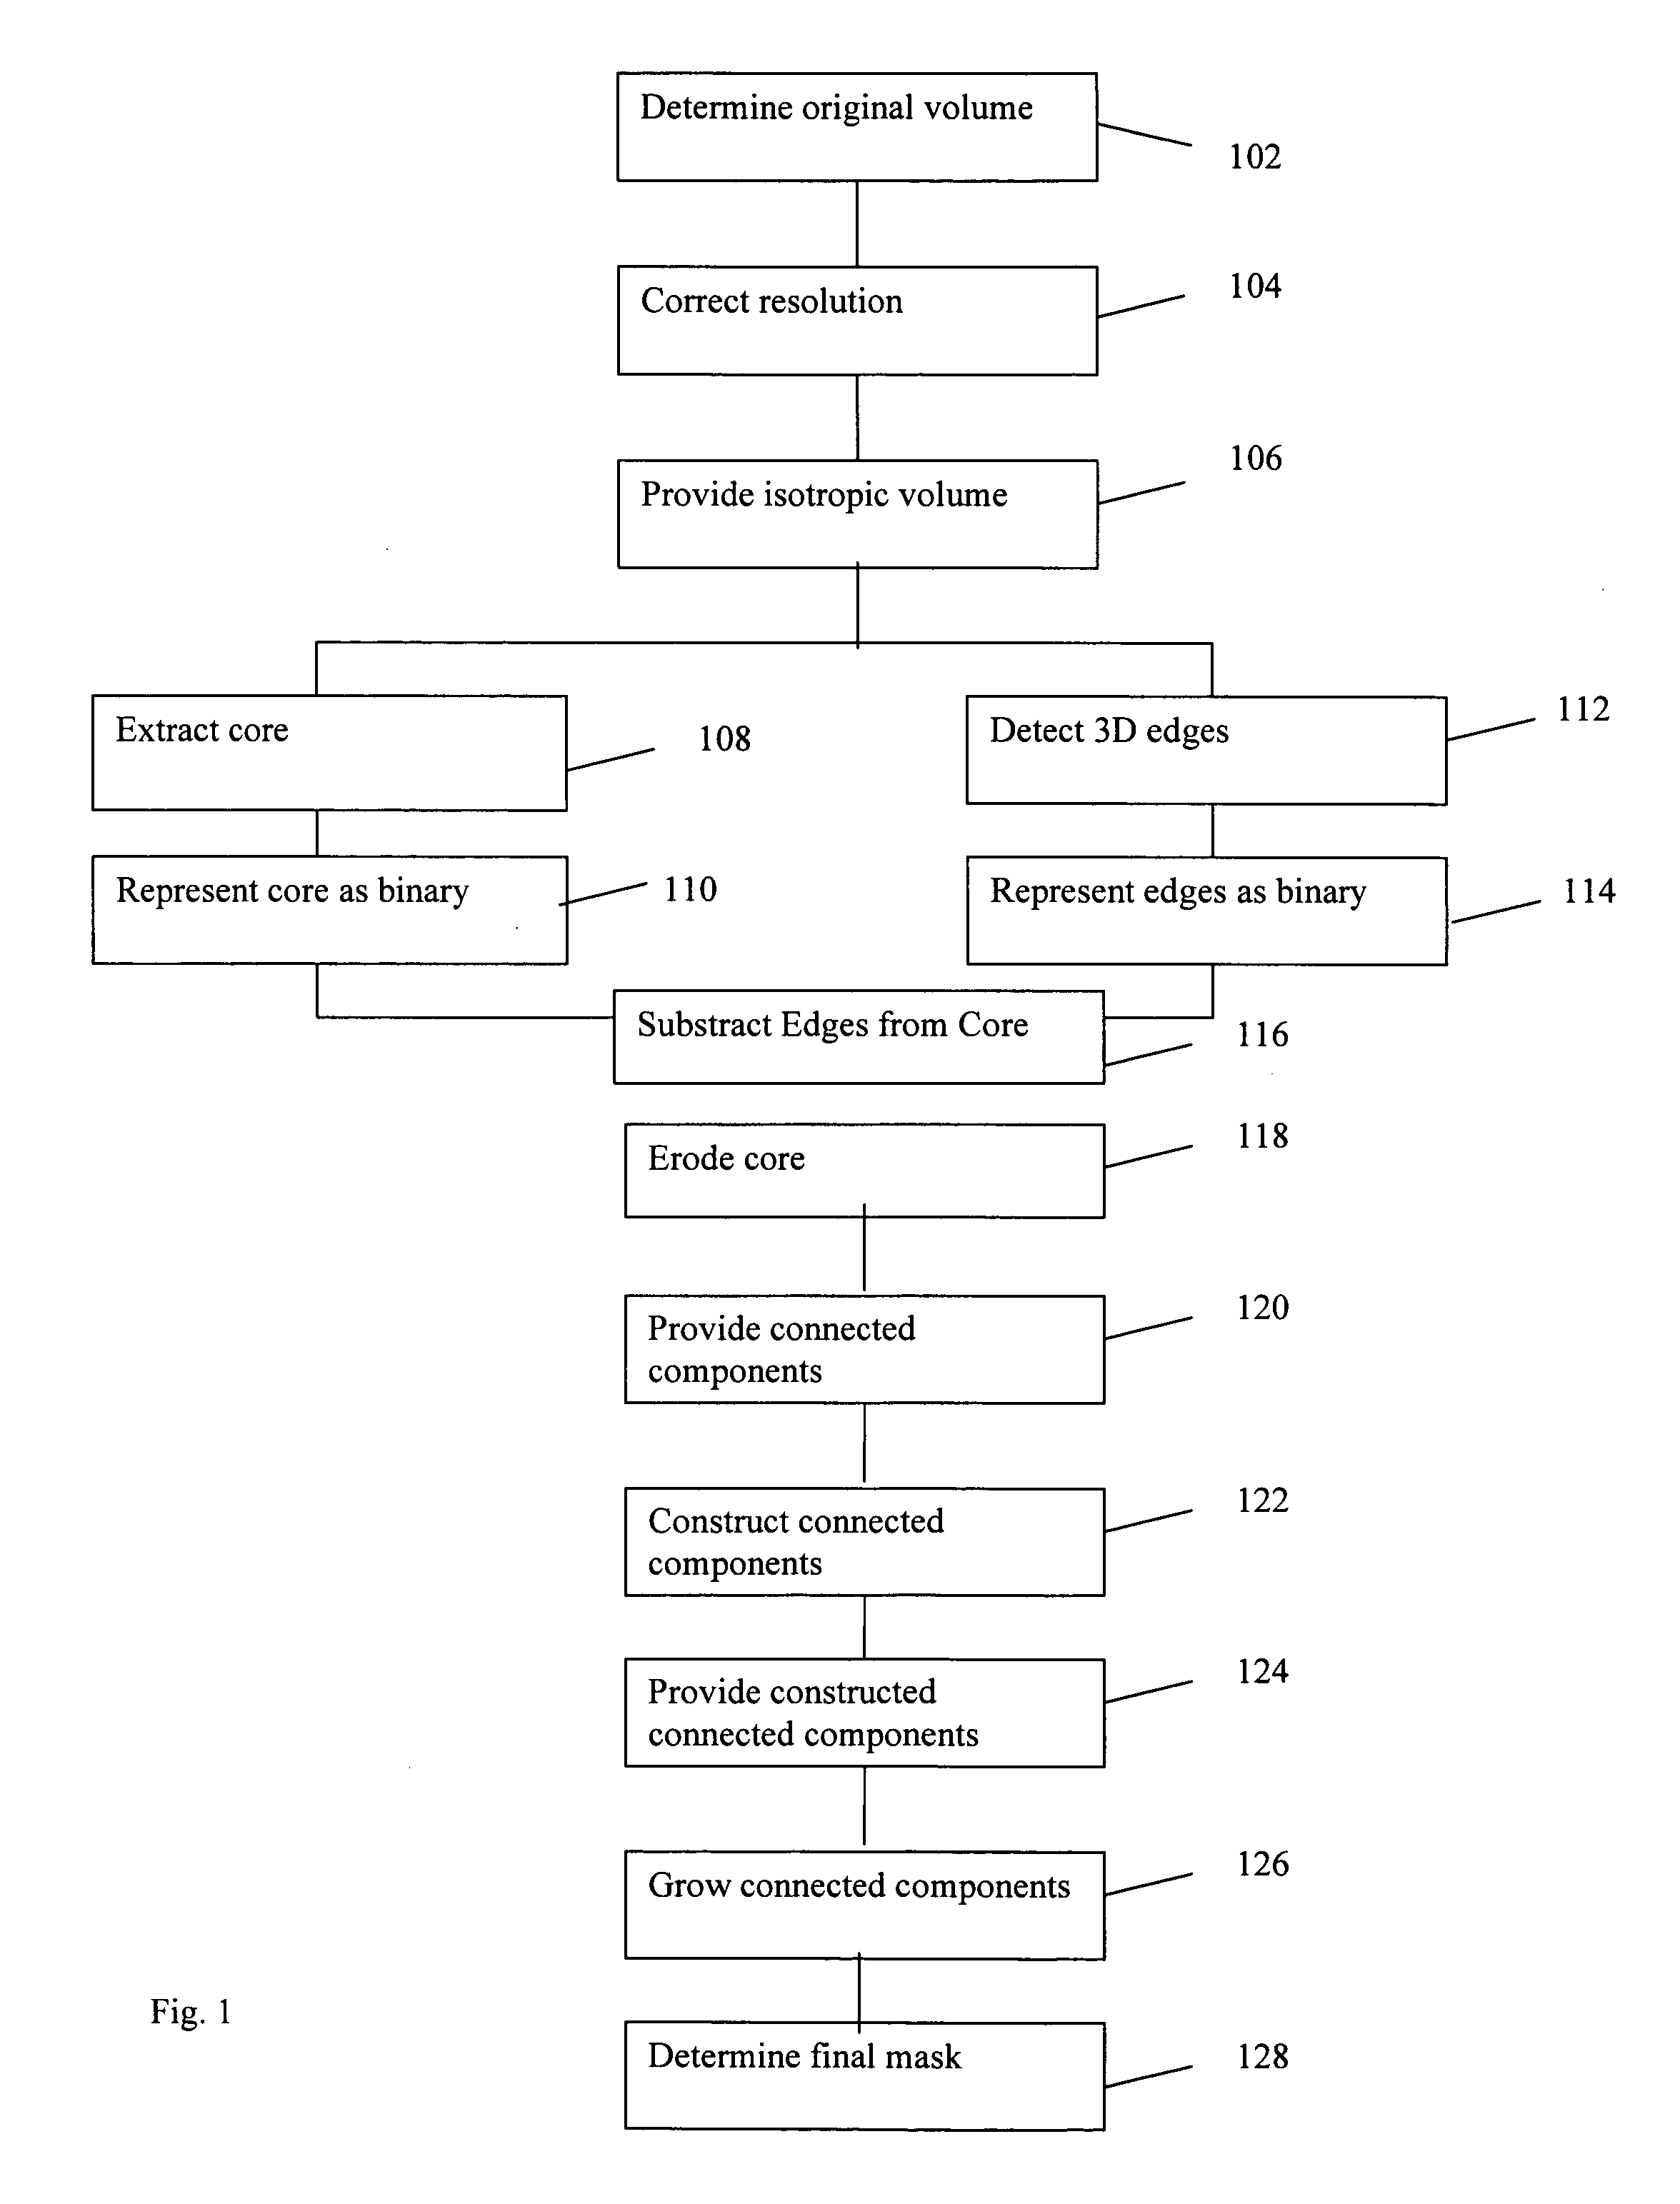 System, software arrangement and method for segmenting an image